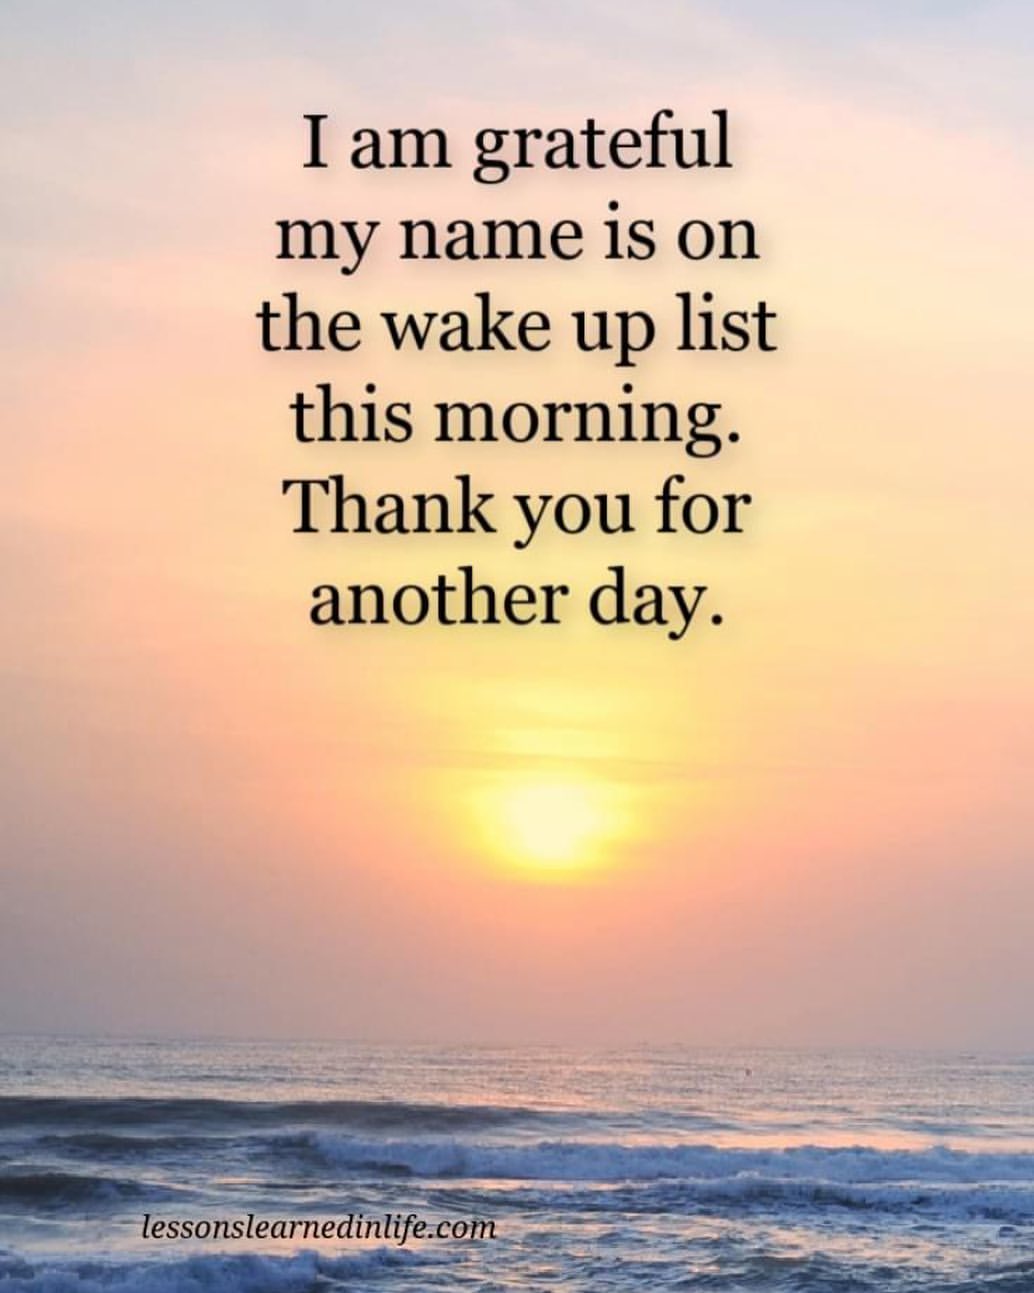 I am grateful my name is on the wake up list this morning. Thank you for another day.